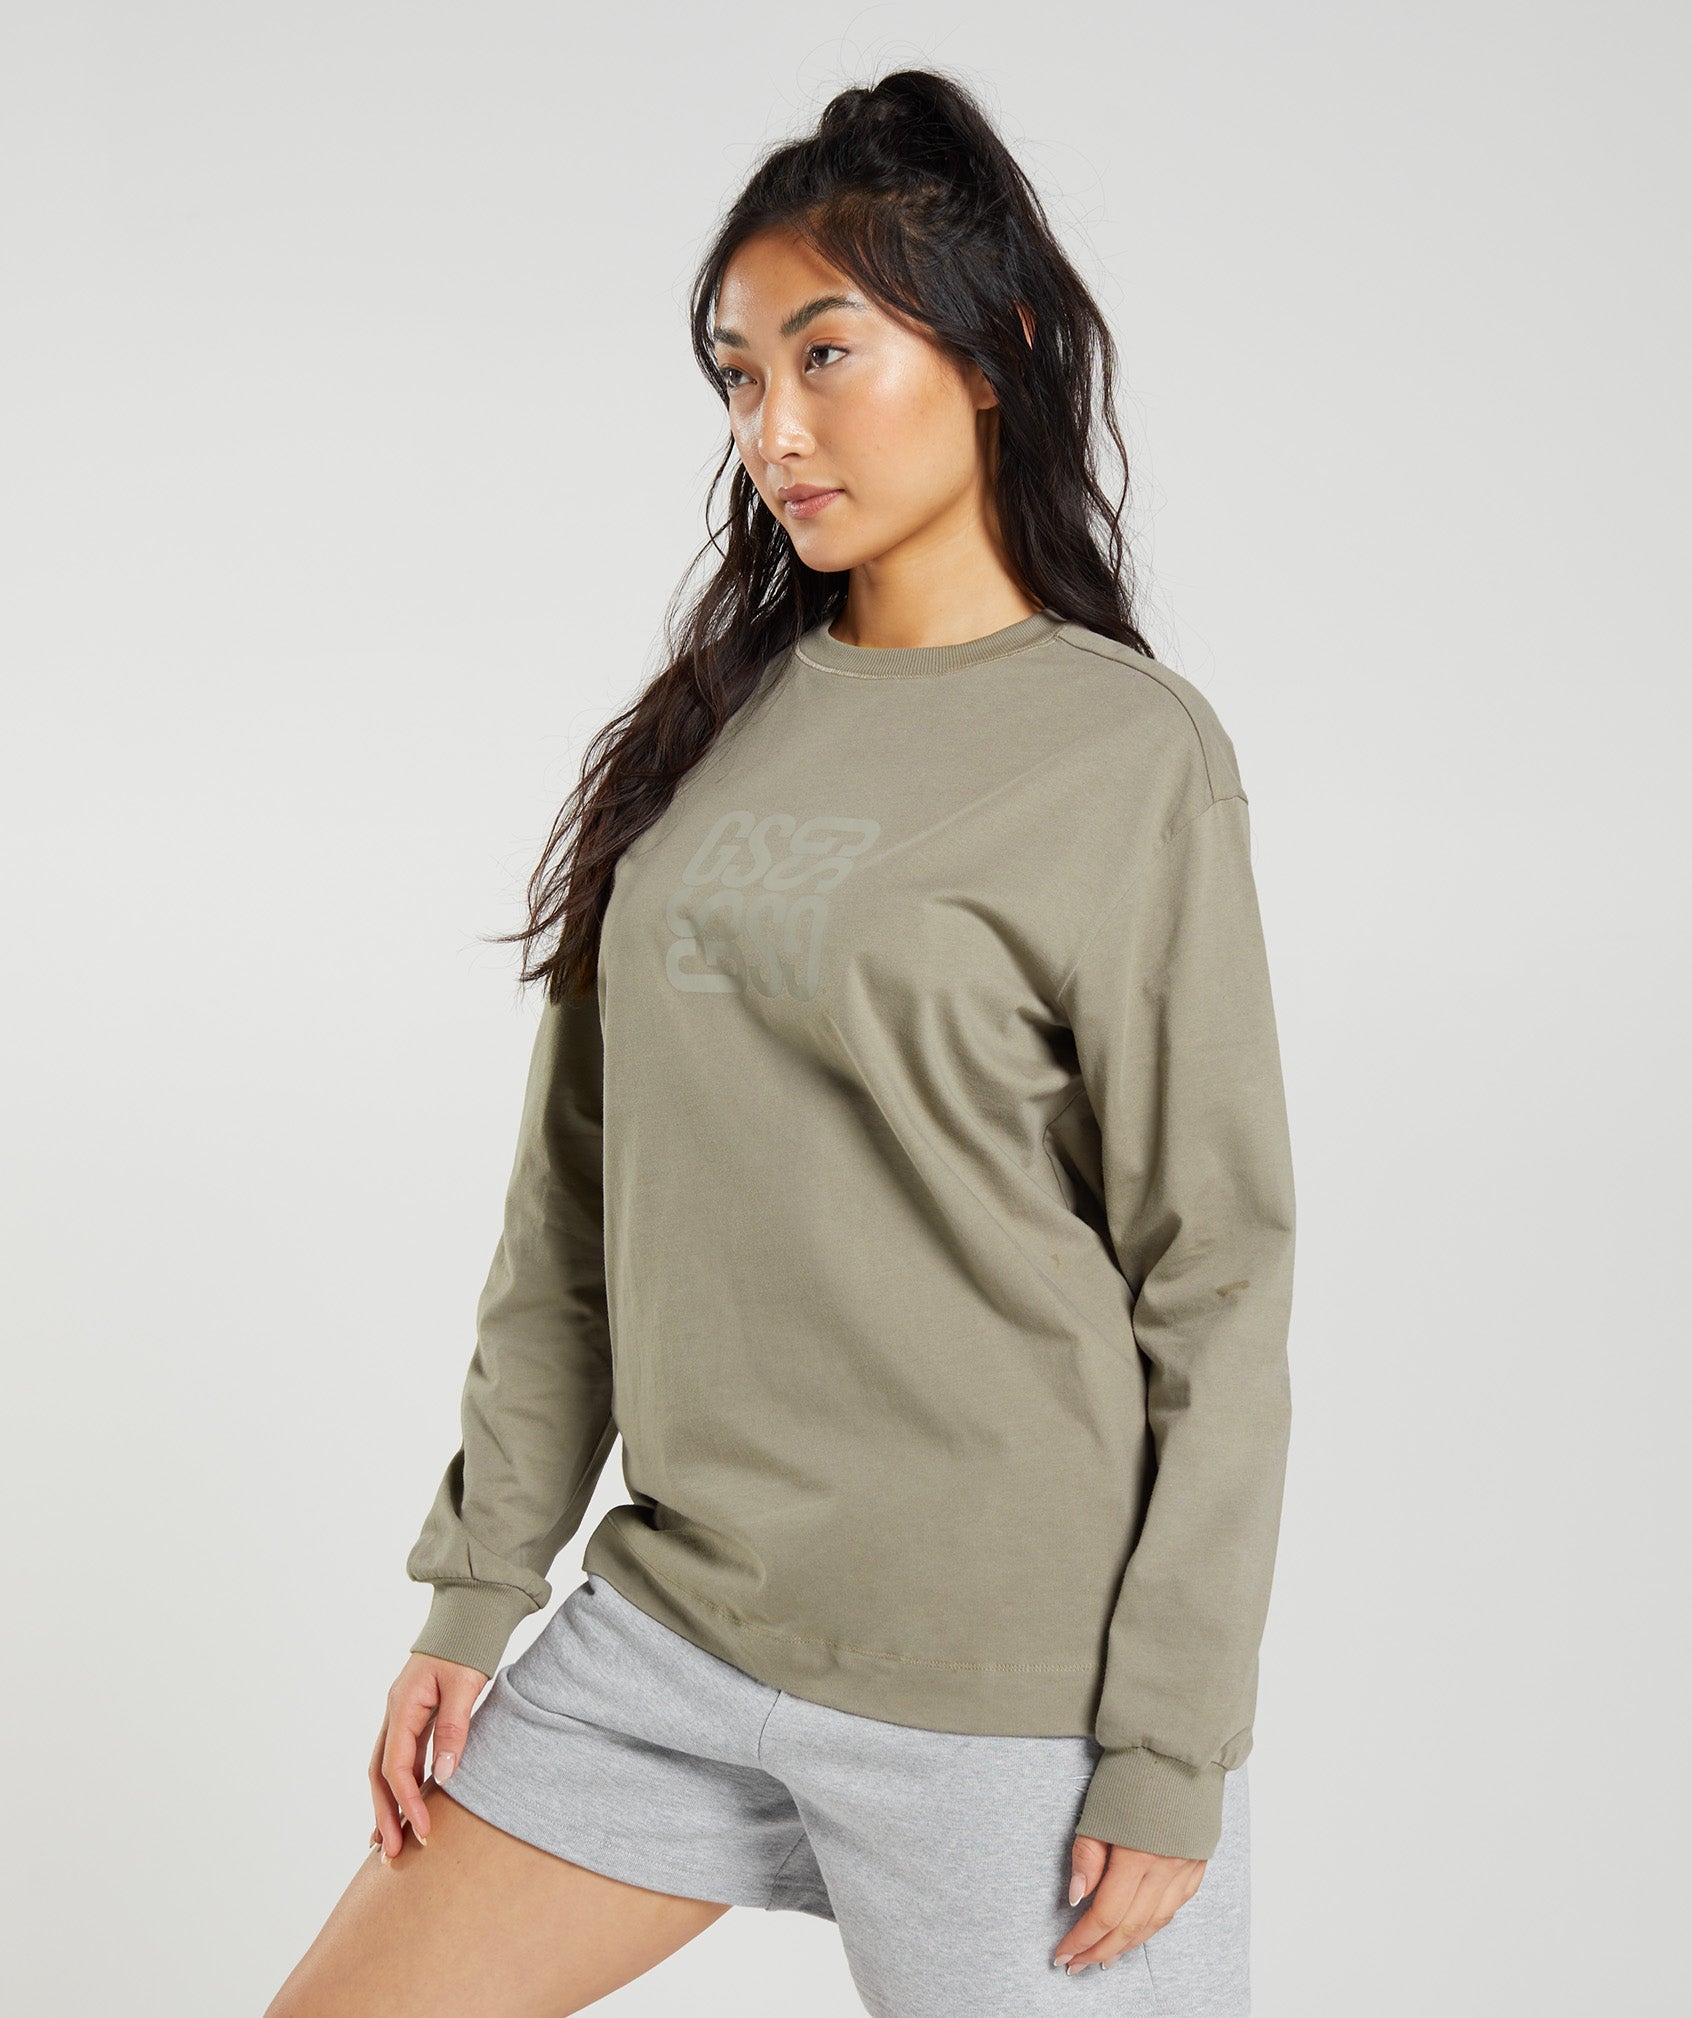 Cotton Oversized Long Sleeve Top in Earthy Brown